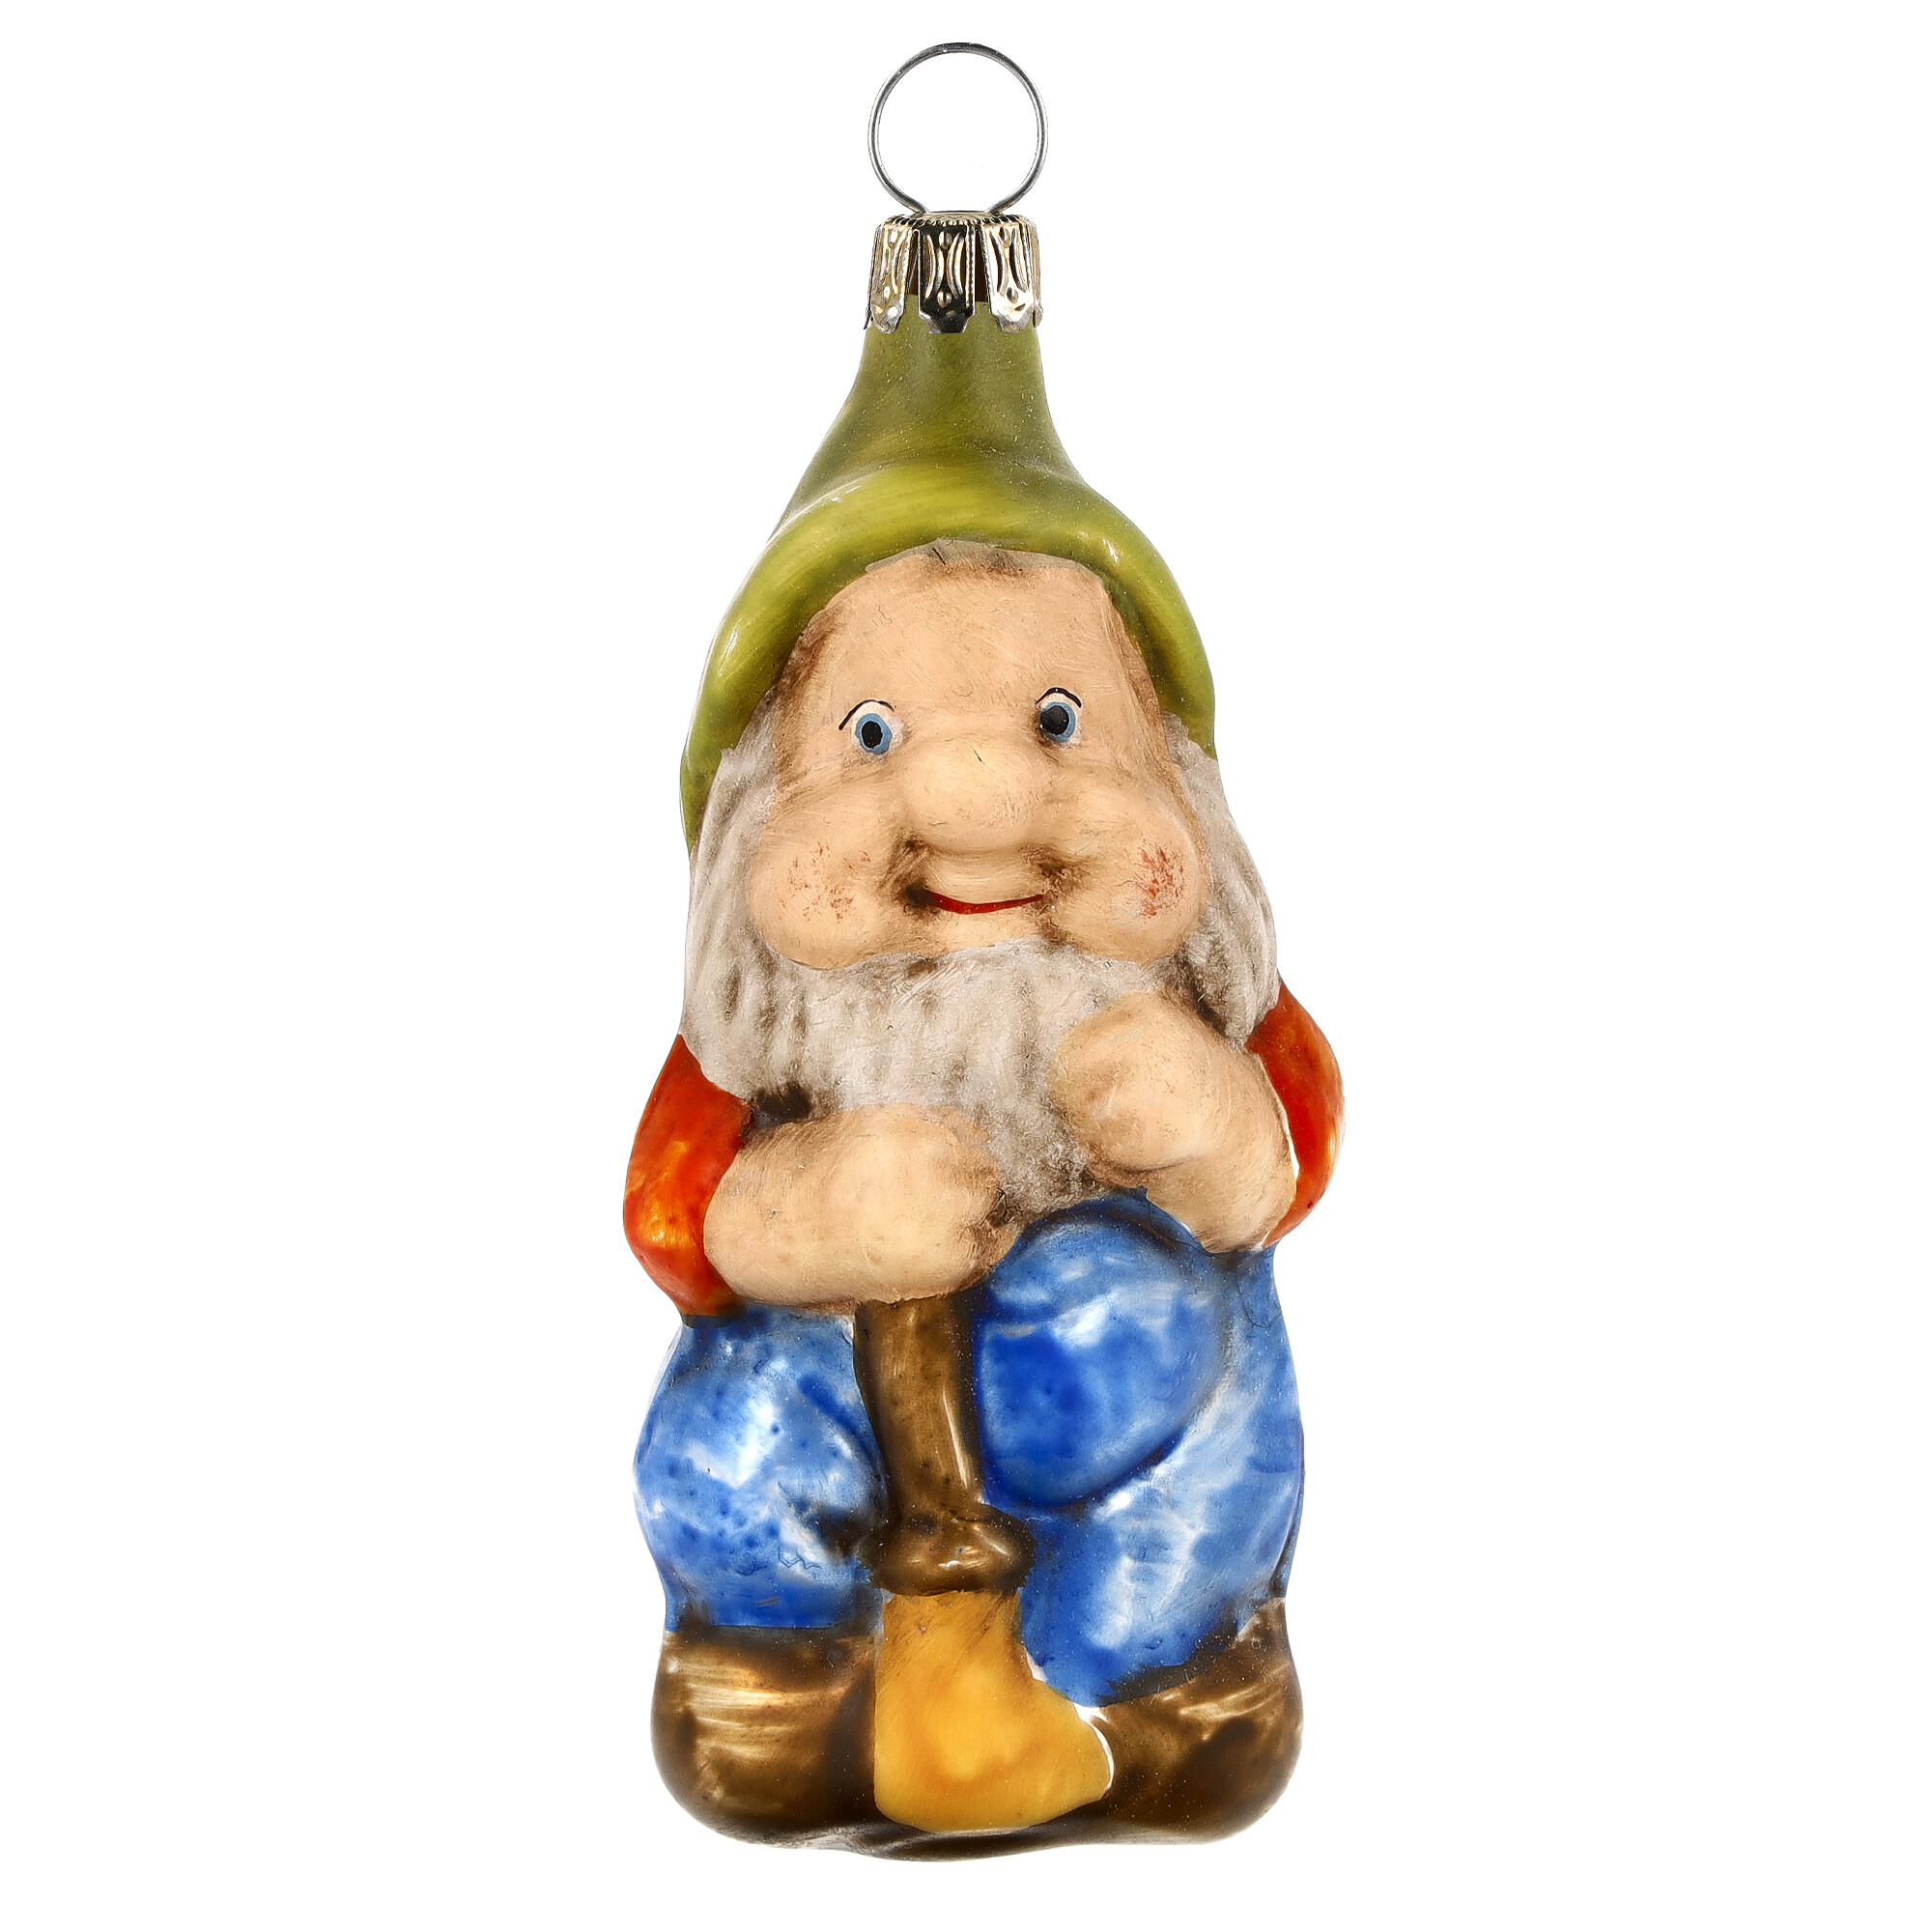 Retro Vintage style Christmas Glass Ornament - Dwarf with broom